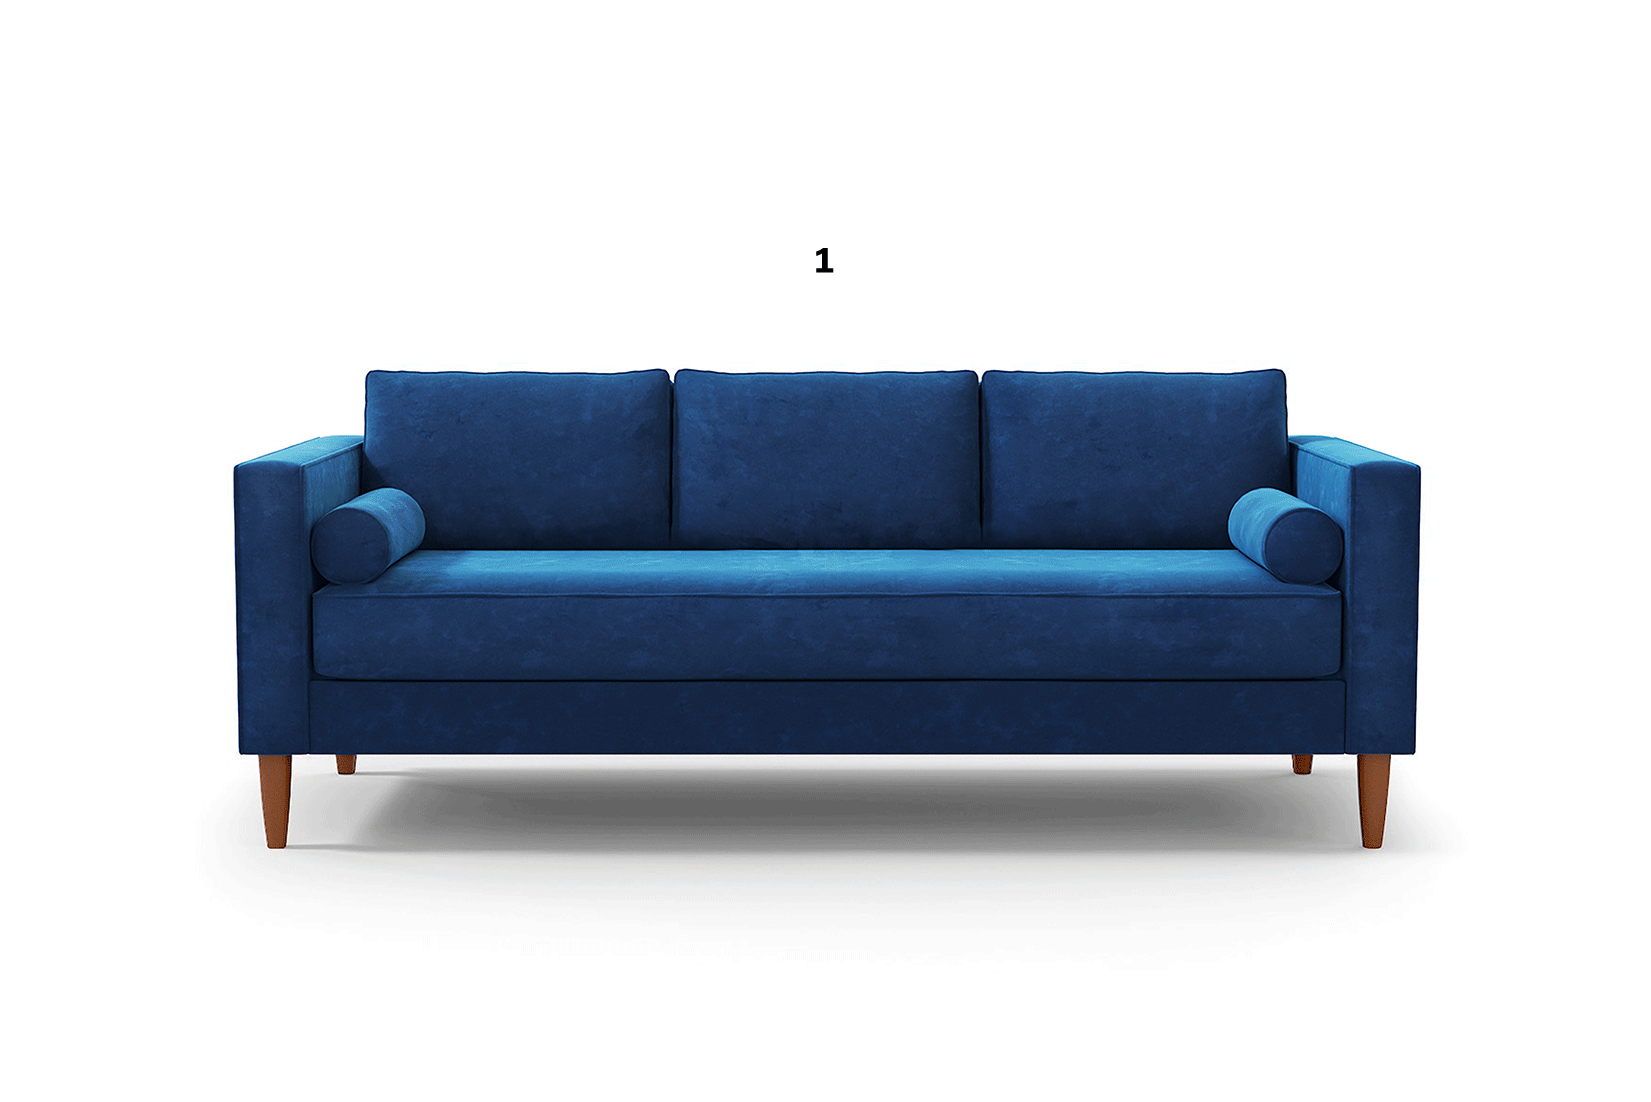 What is the perfect sofa cushion configuration?